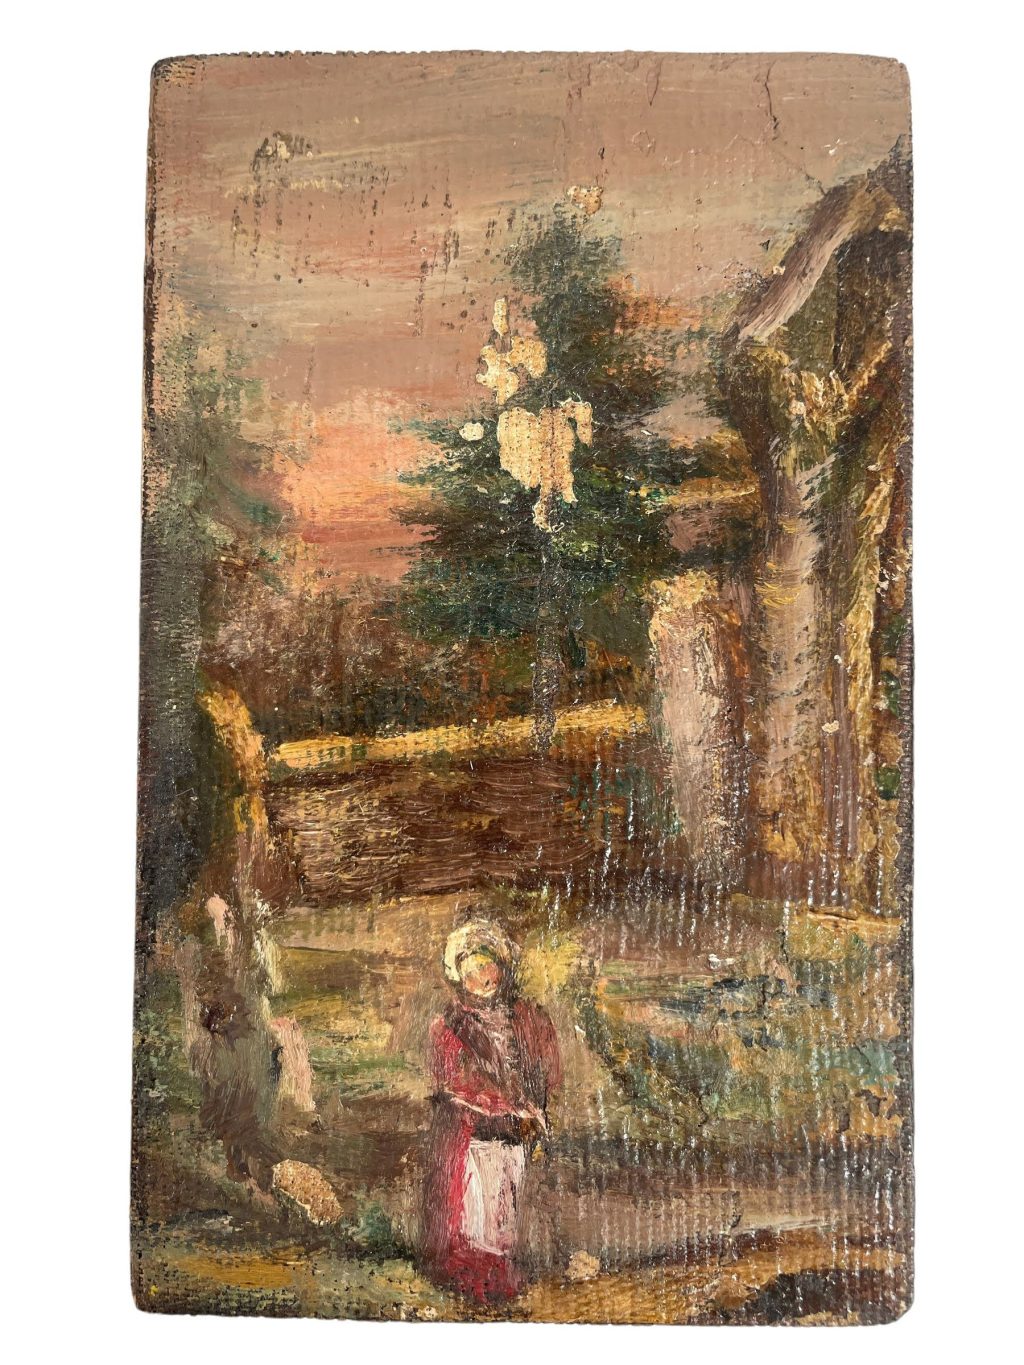 Antique French Small Tiny Woman Girl “The Red Dress” Oil Painting On Wood Board Wall Decor Decoration c1900’s